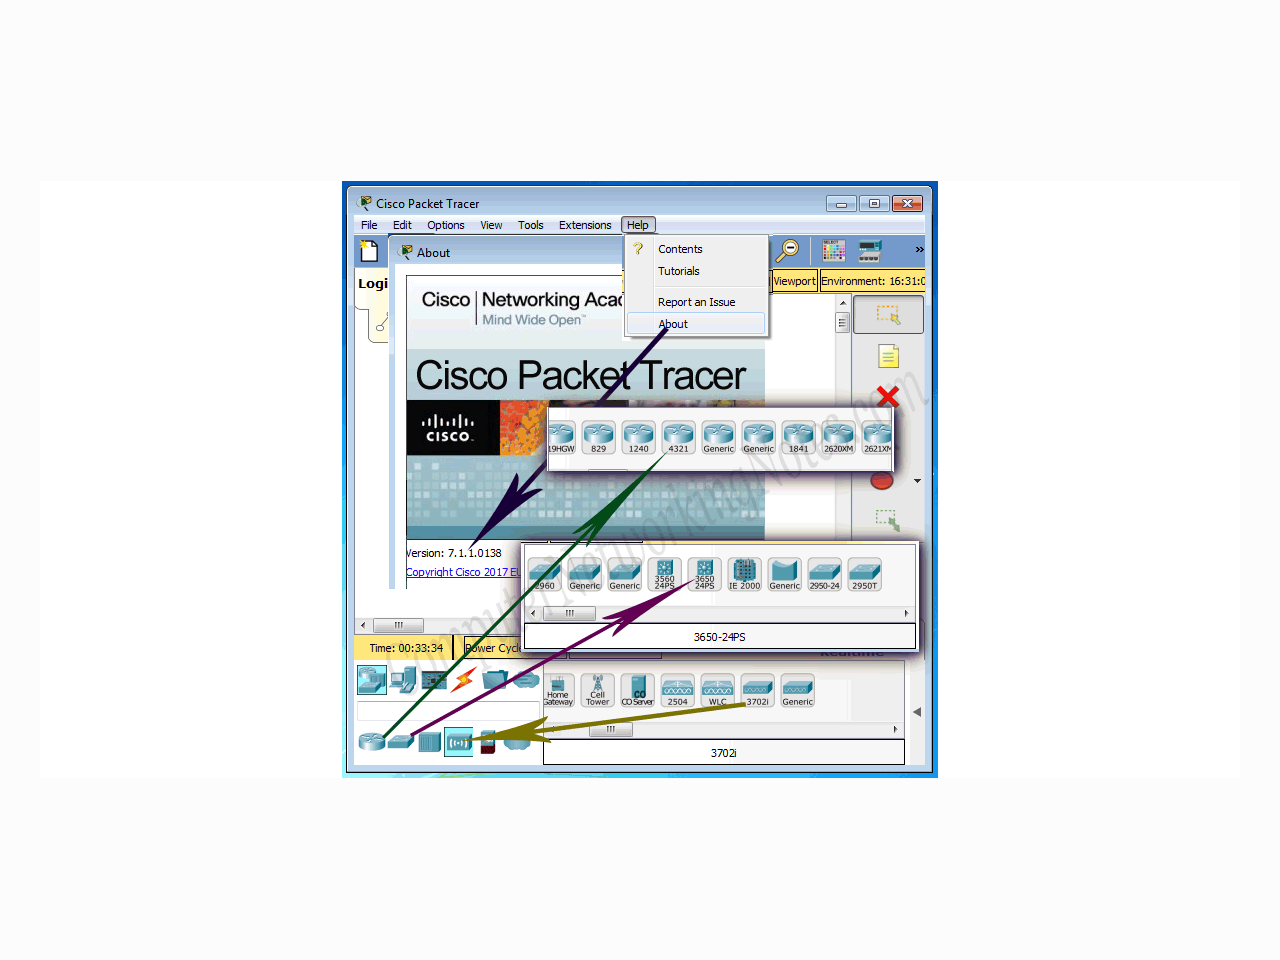 Packet tracer download 6.2